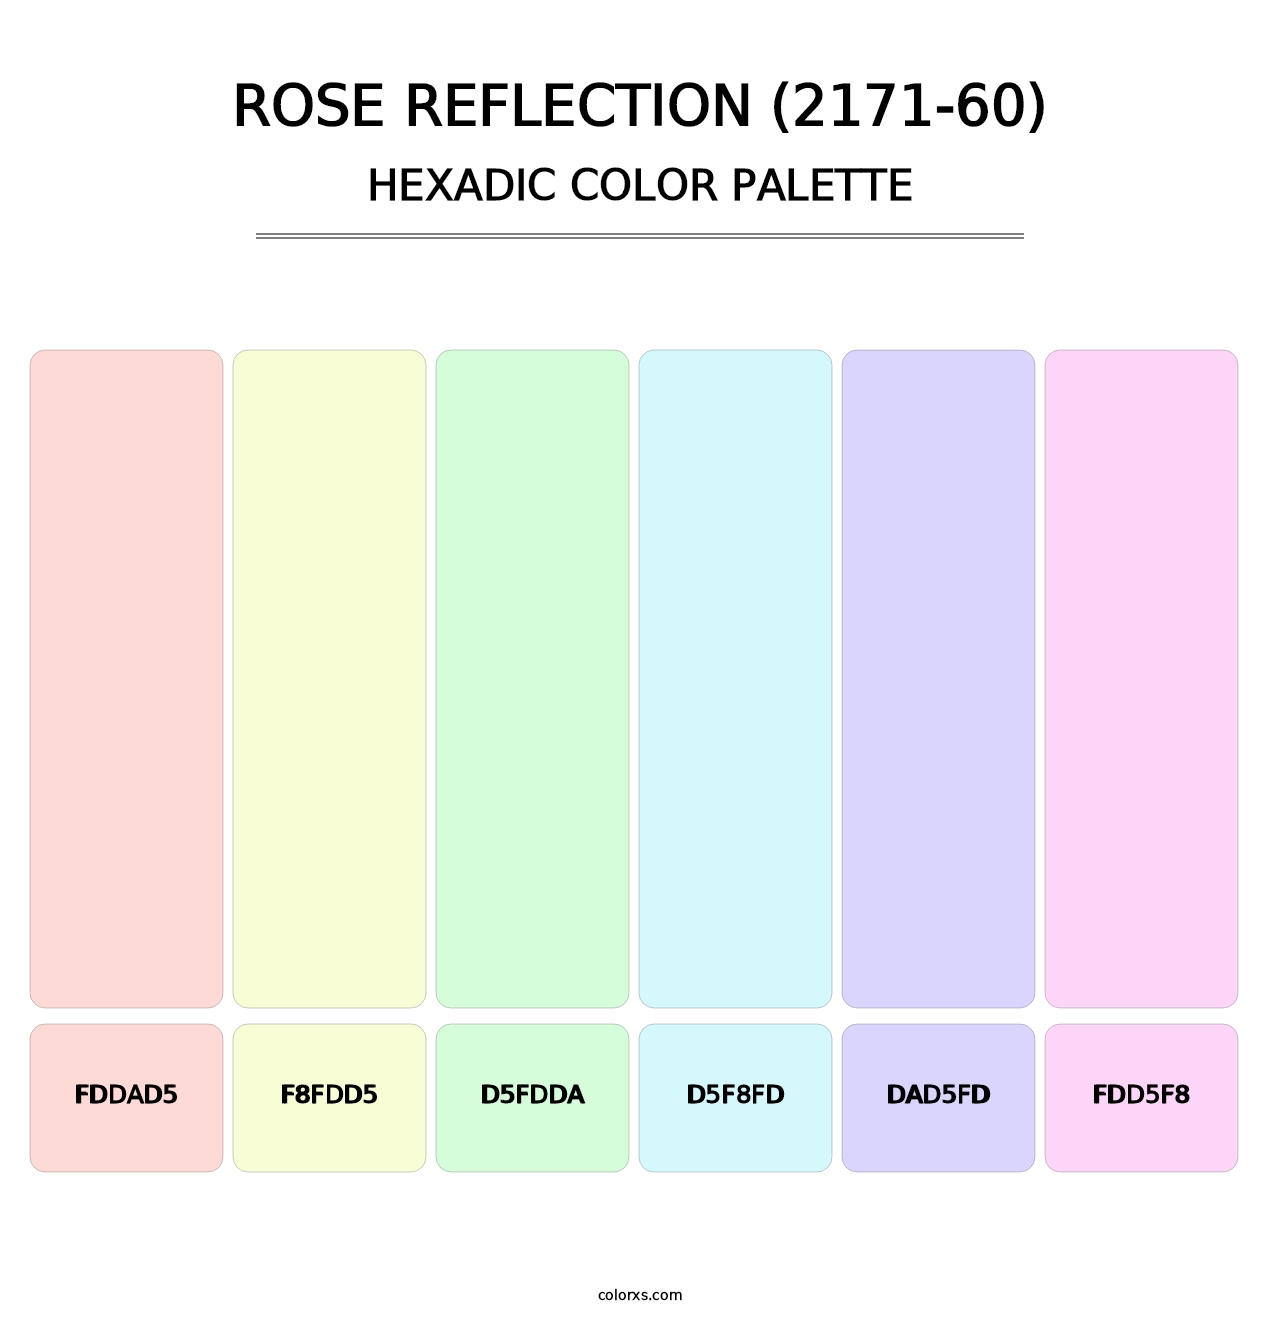 Rose Reflection (2171-60) - Hexadic Color Palette